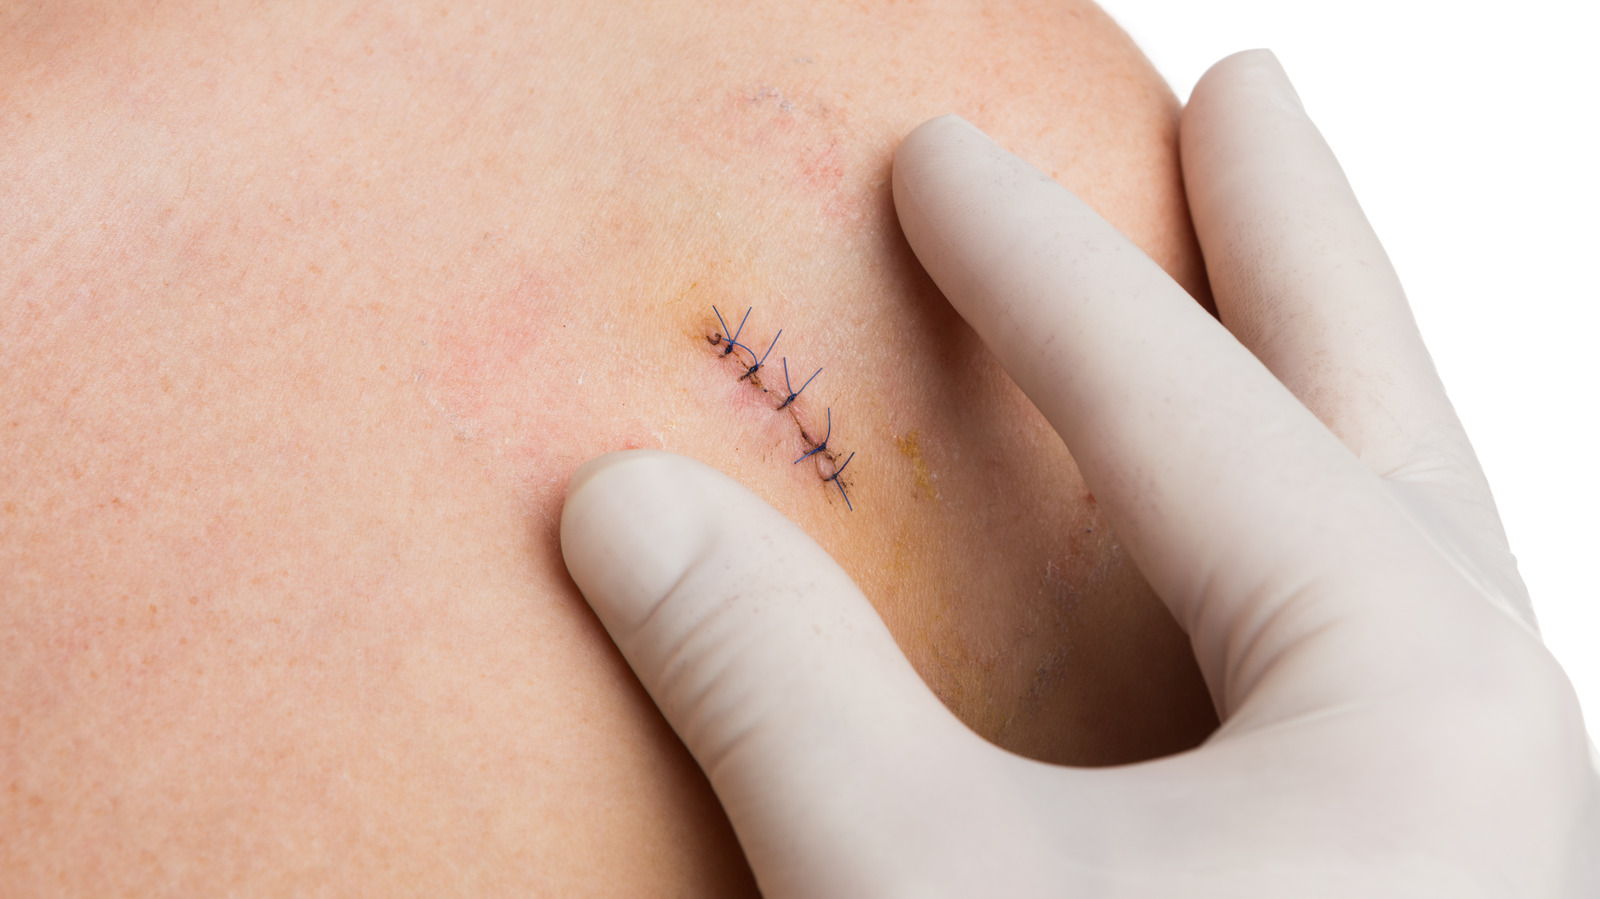 Care for your Stitches - What You Need to Know